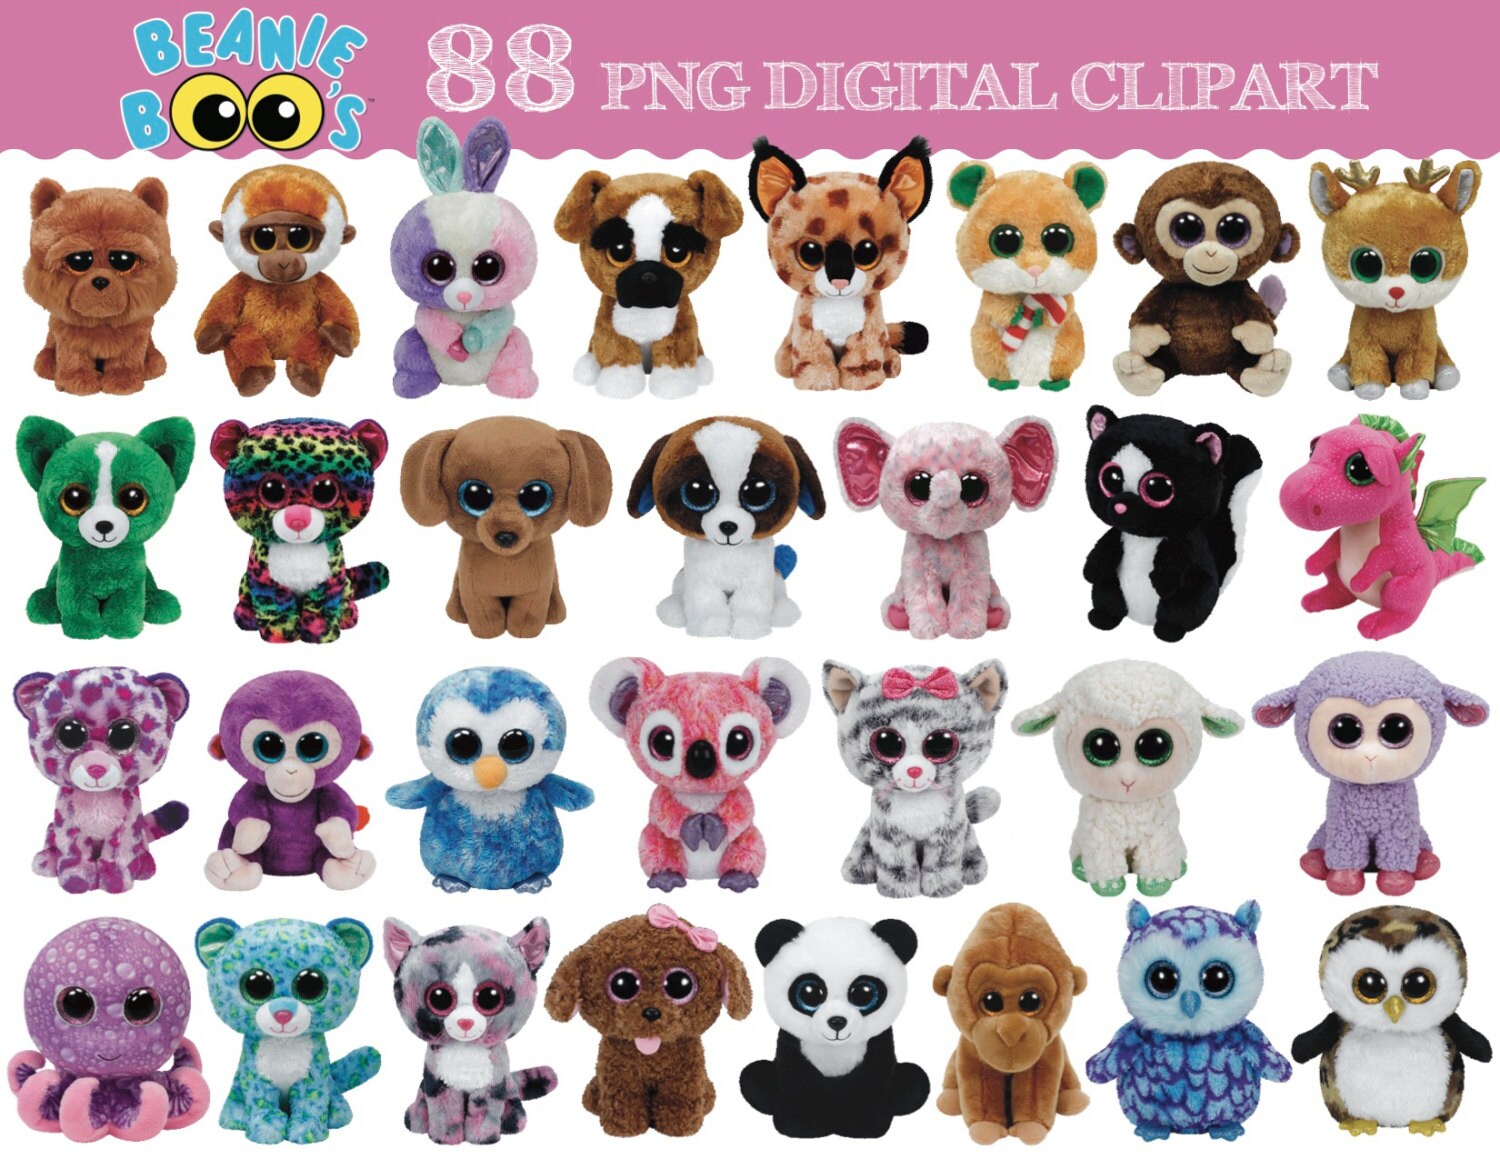 TY Beanie Boo 88 digital clipart images transparent